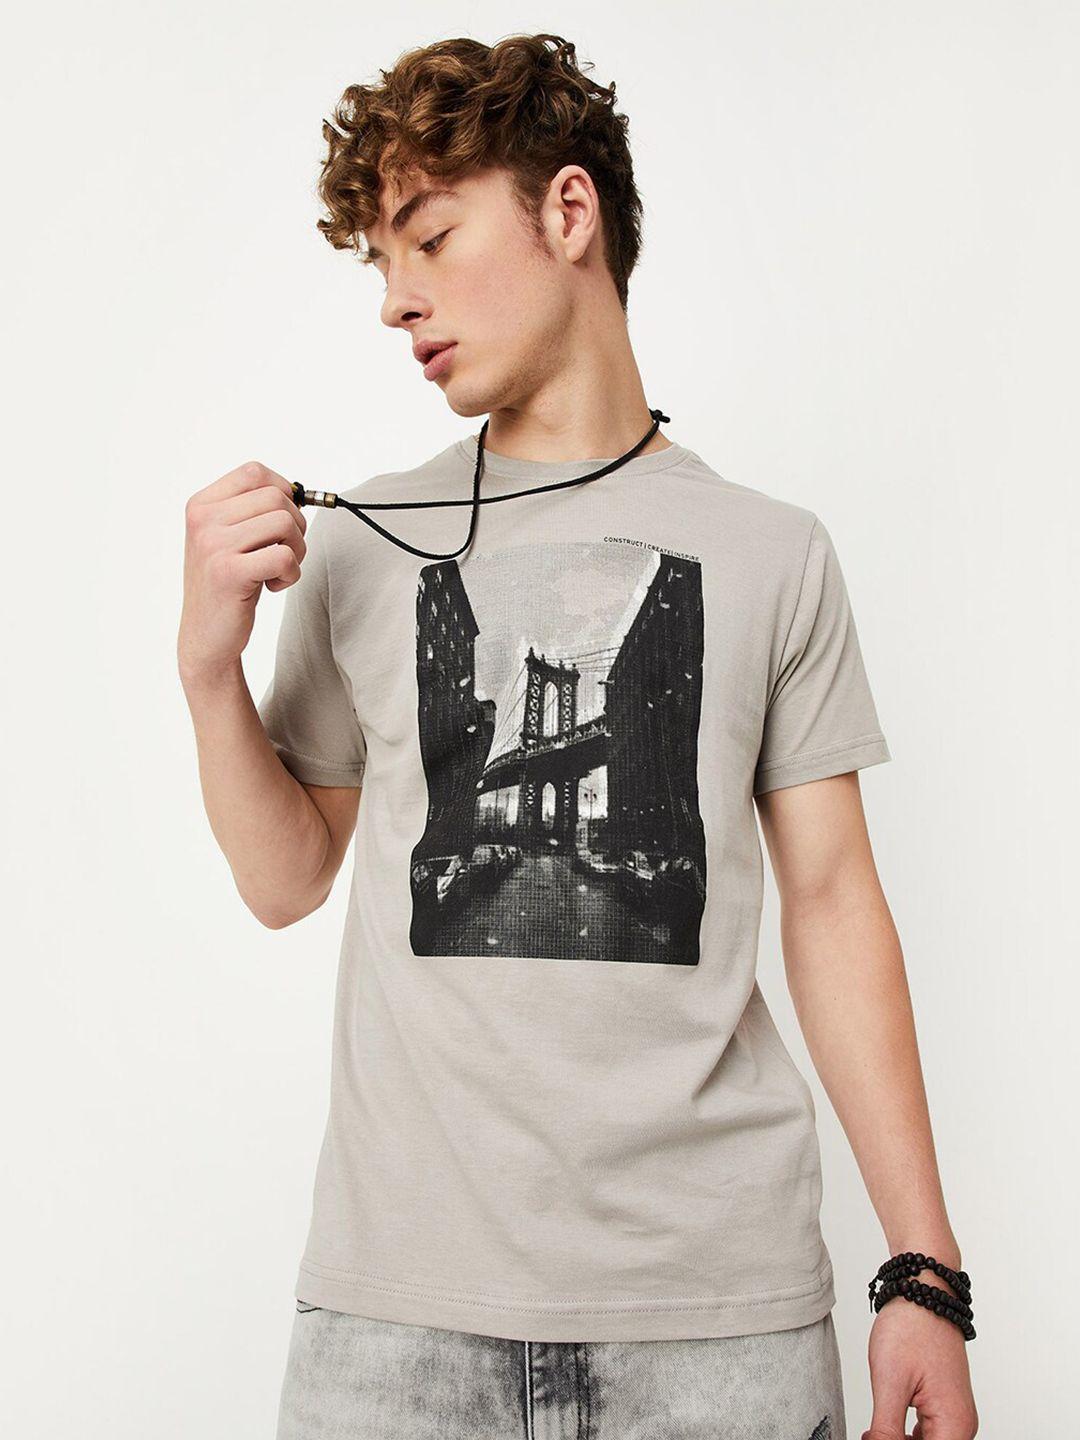 max graphic printed pure cotton casual t-shirt